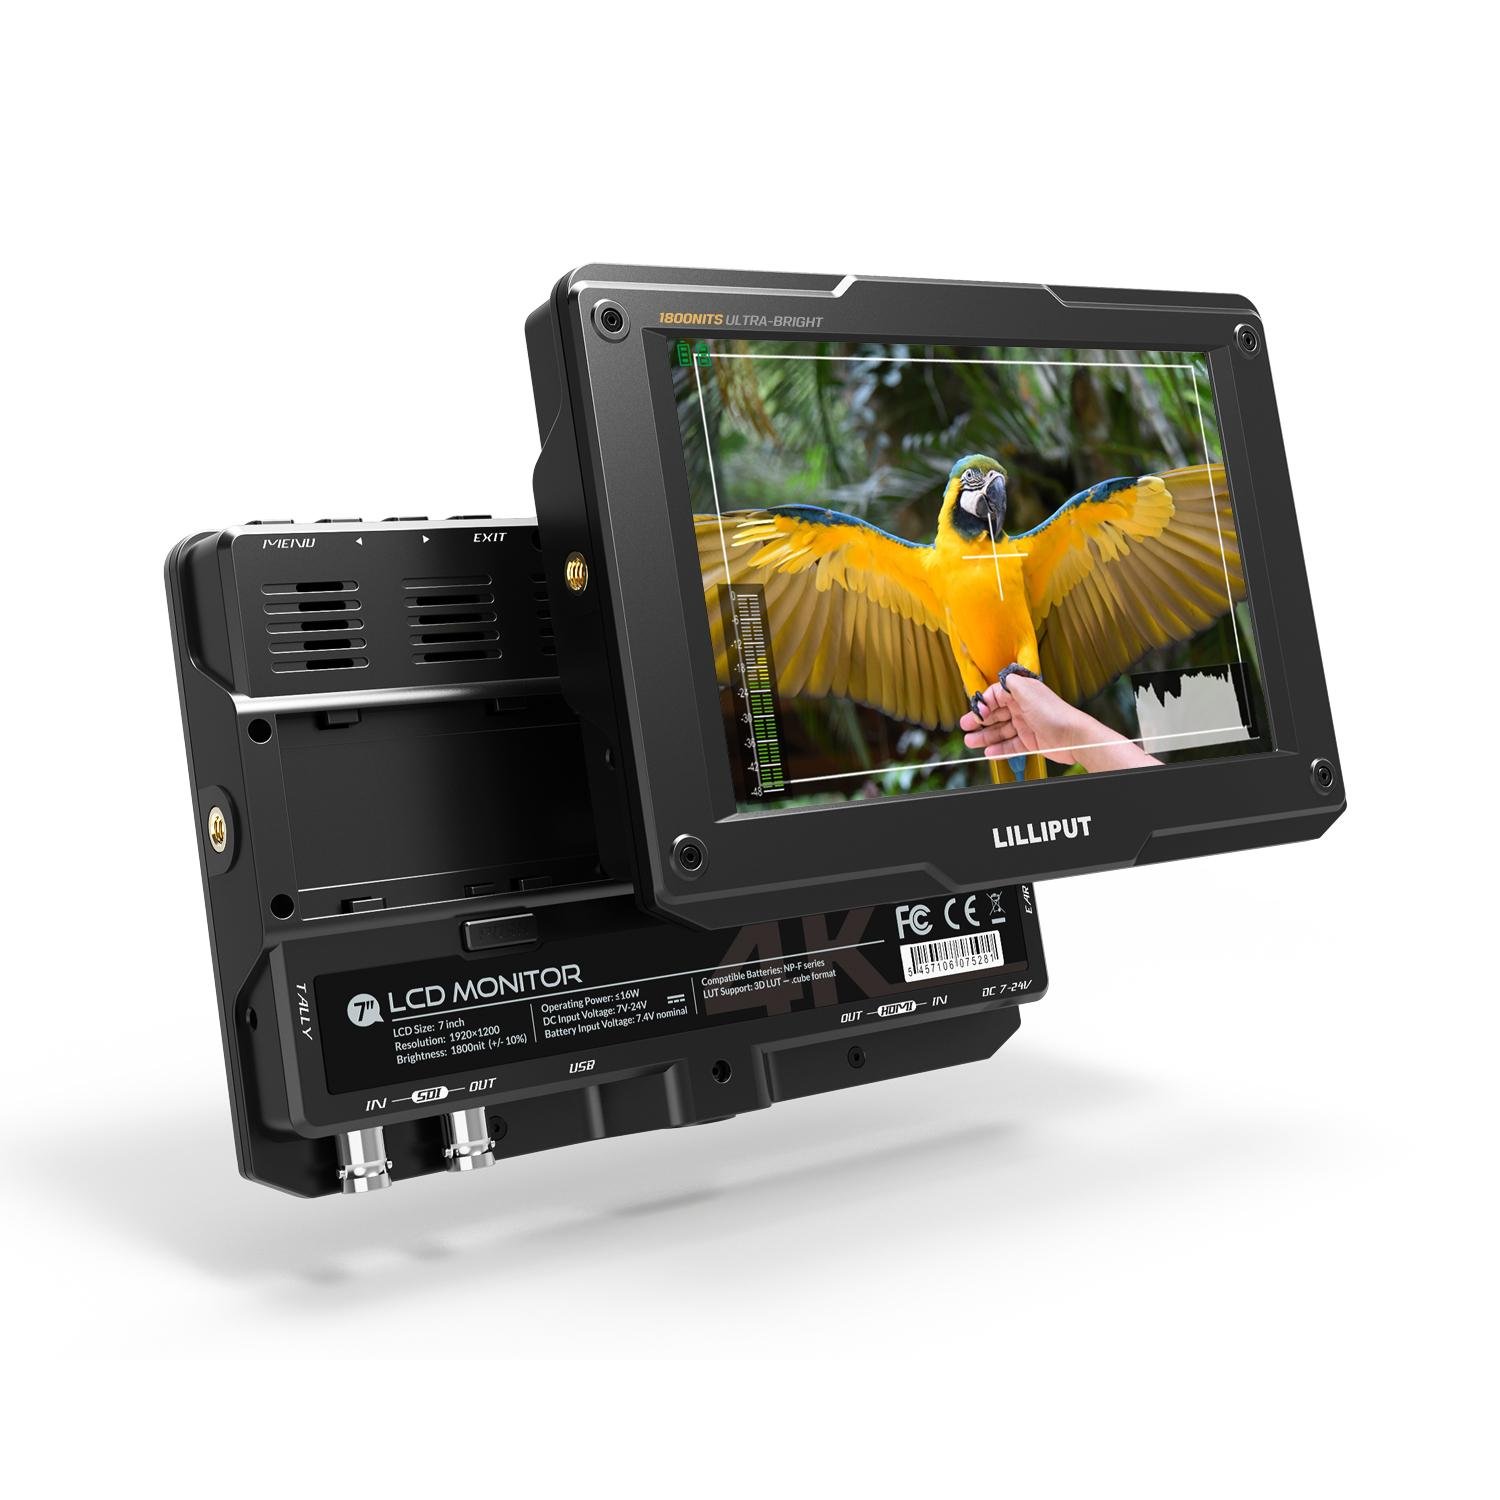 LILLIPUT H7 4K Ultra Brightness 7 inch Camera Monitor with HDR, 3D-LUT, Color sp